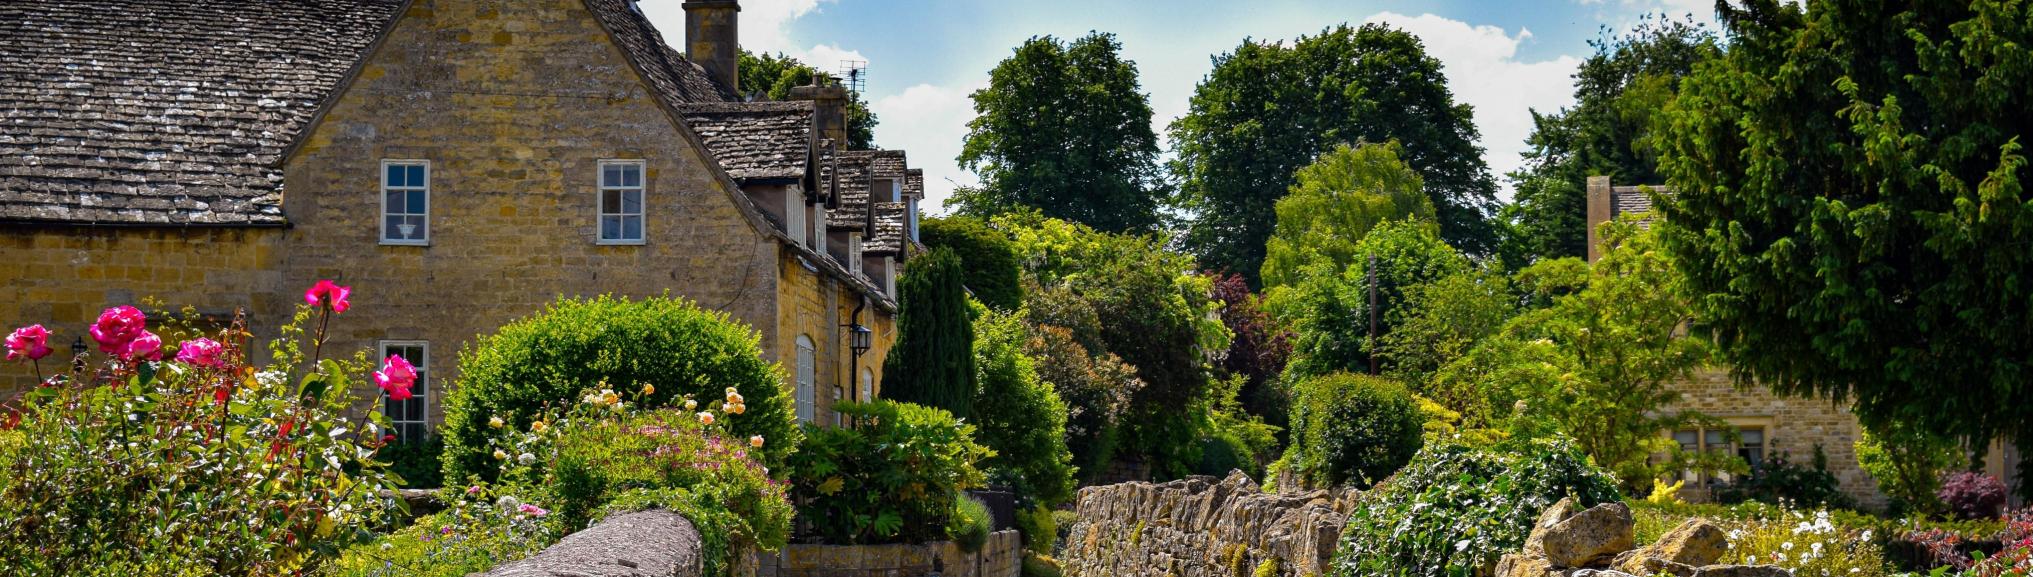 Stanton, The Cotswolds